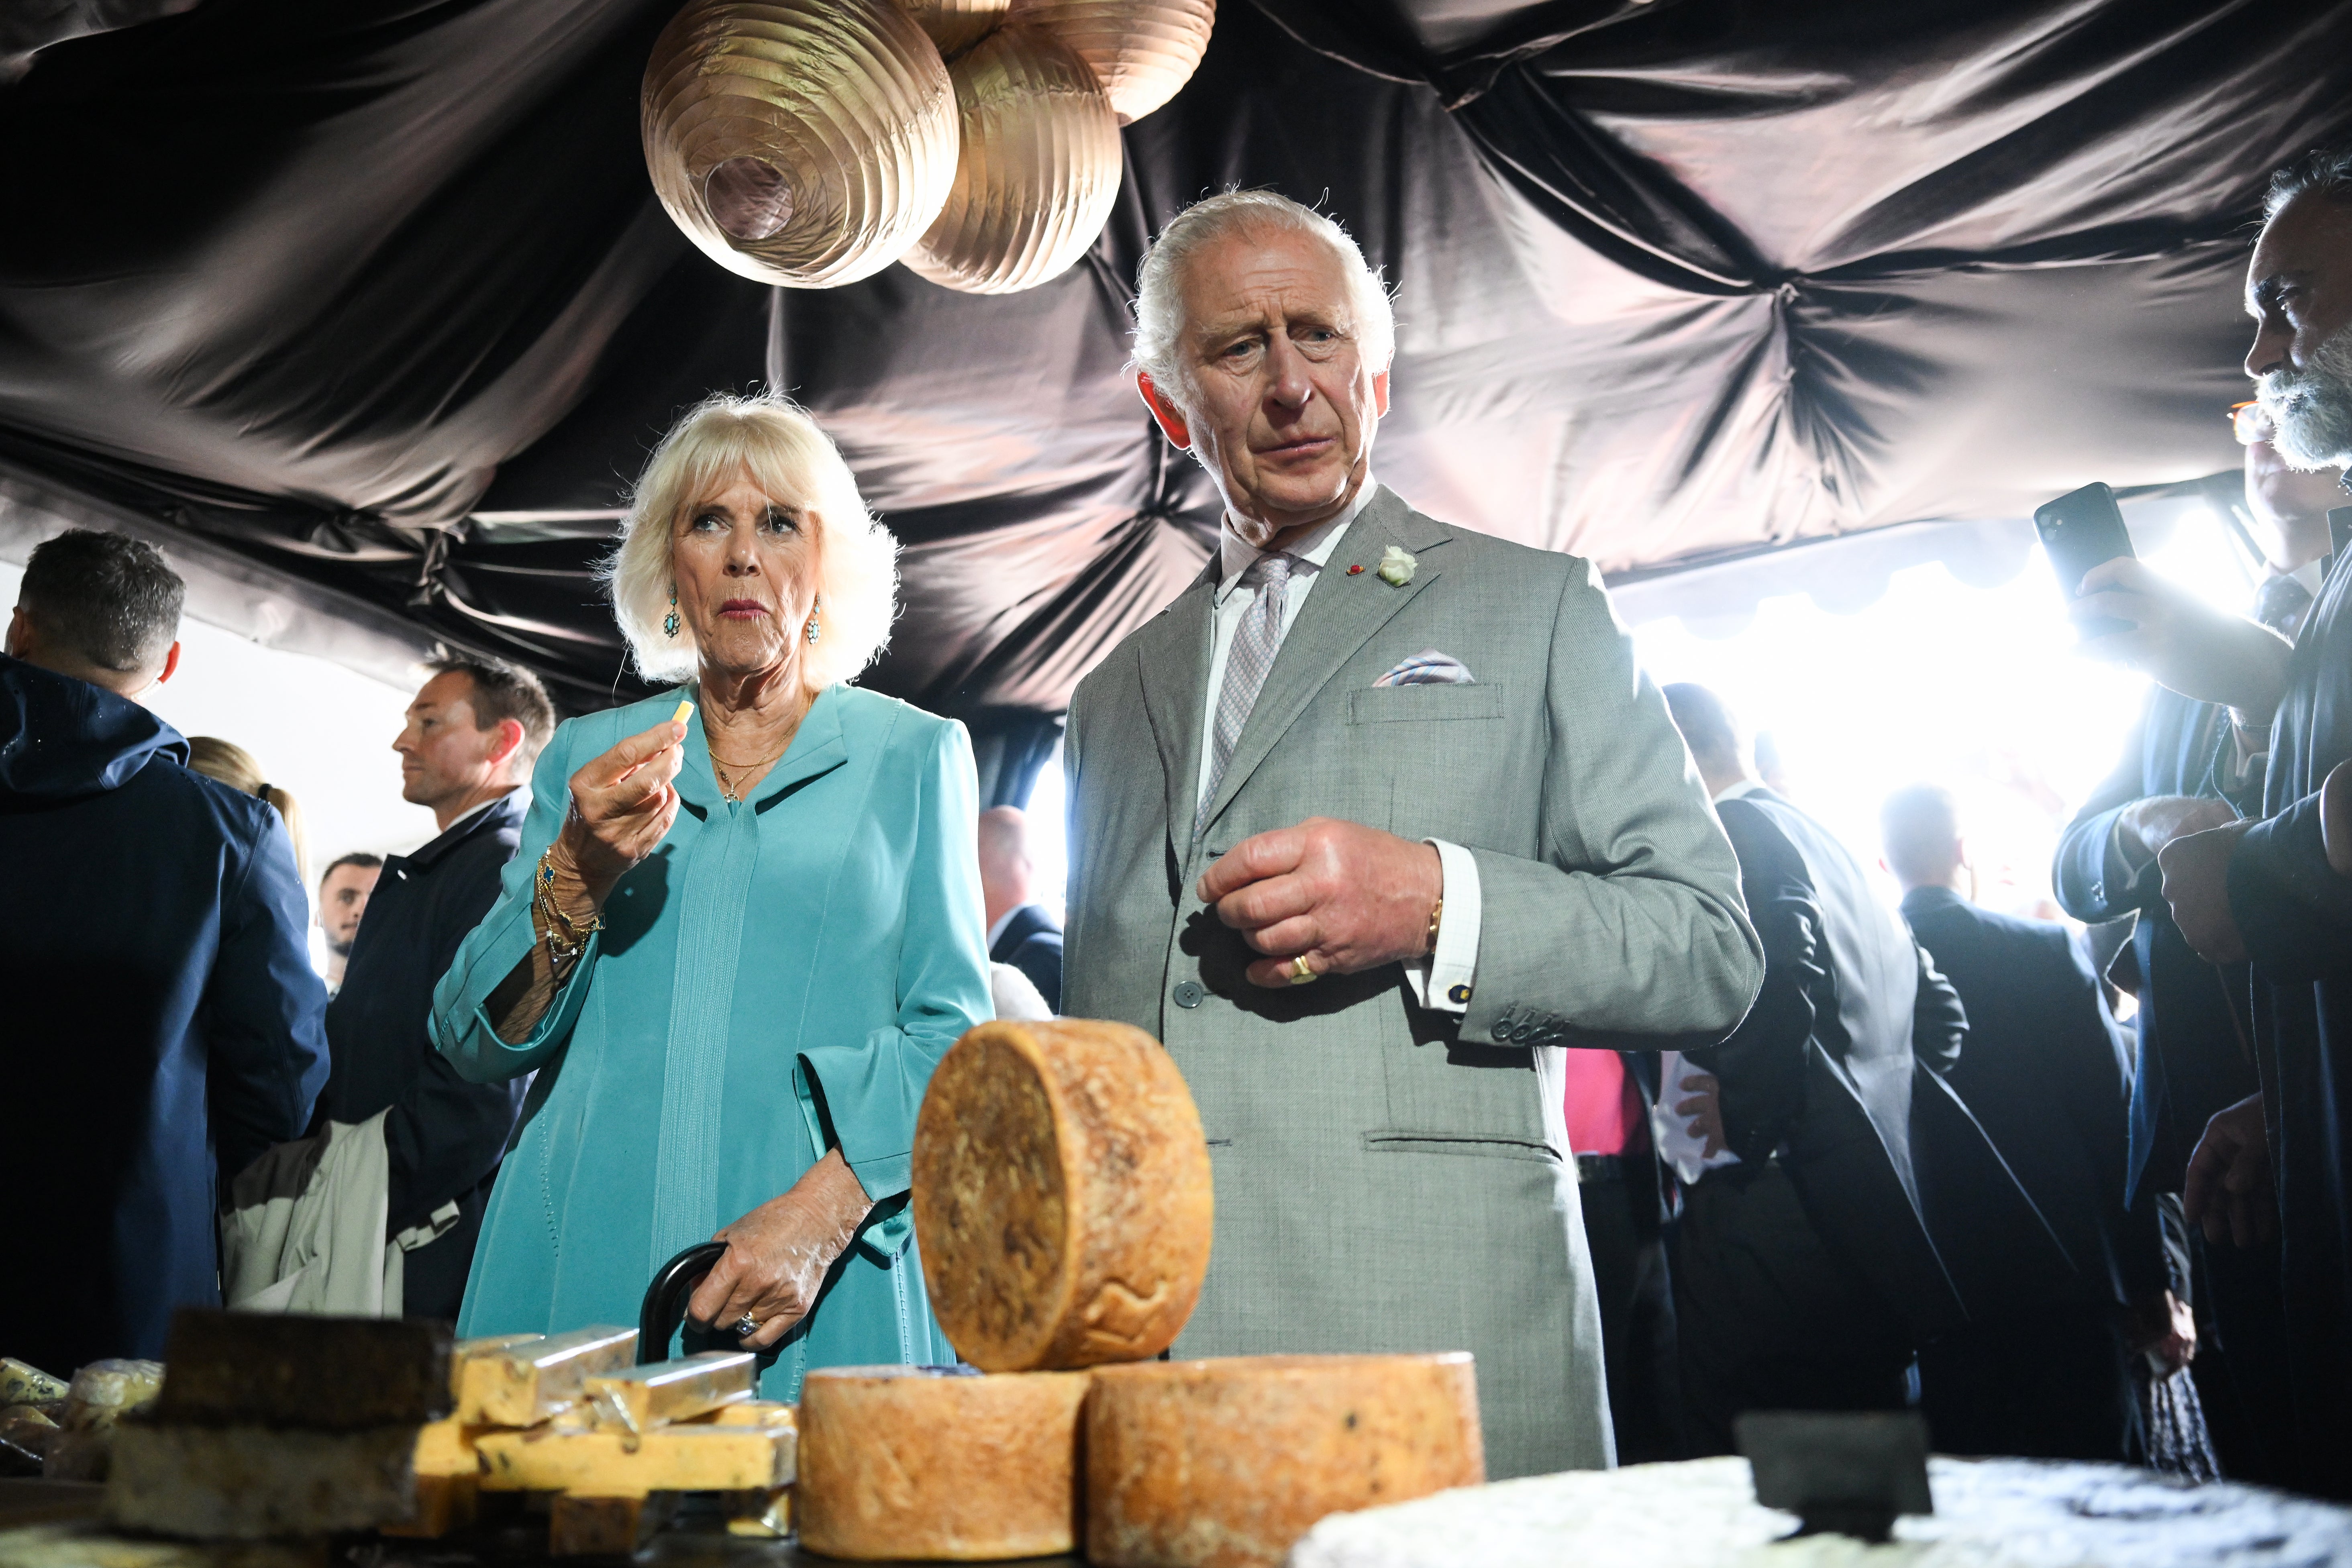 The King and Queen sampling cheese at a festival-style event showcasing the best of British and French local produce